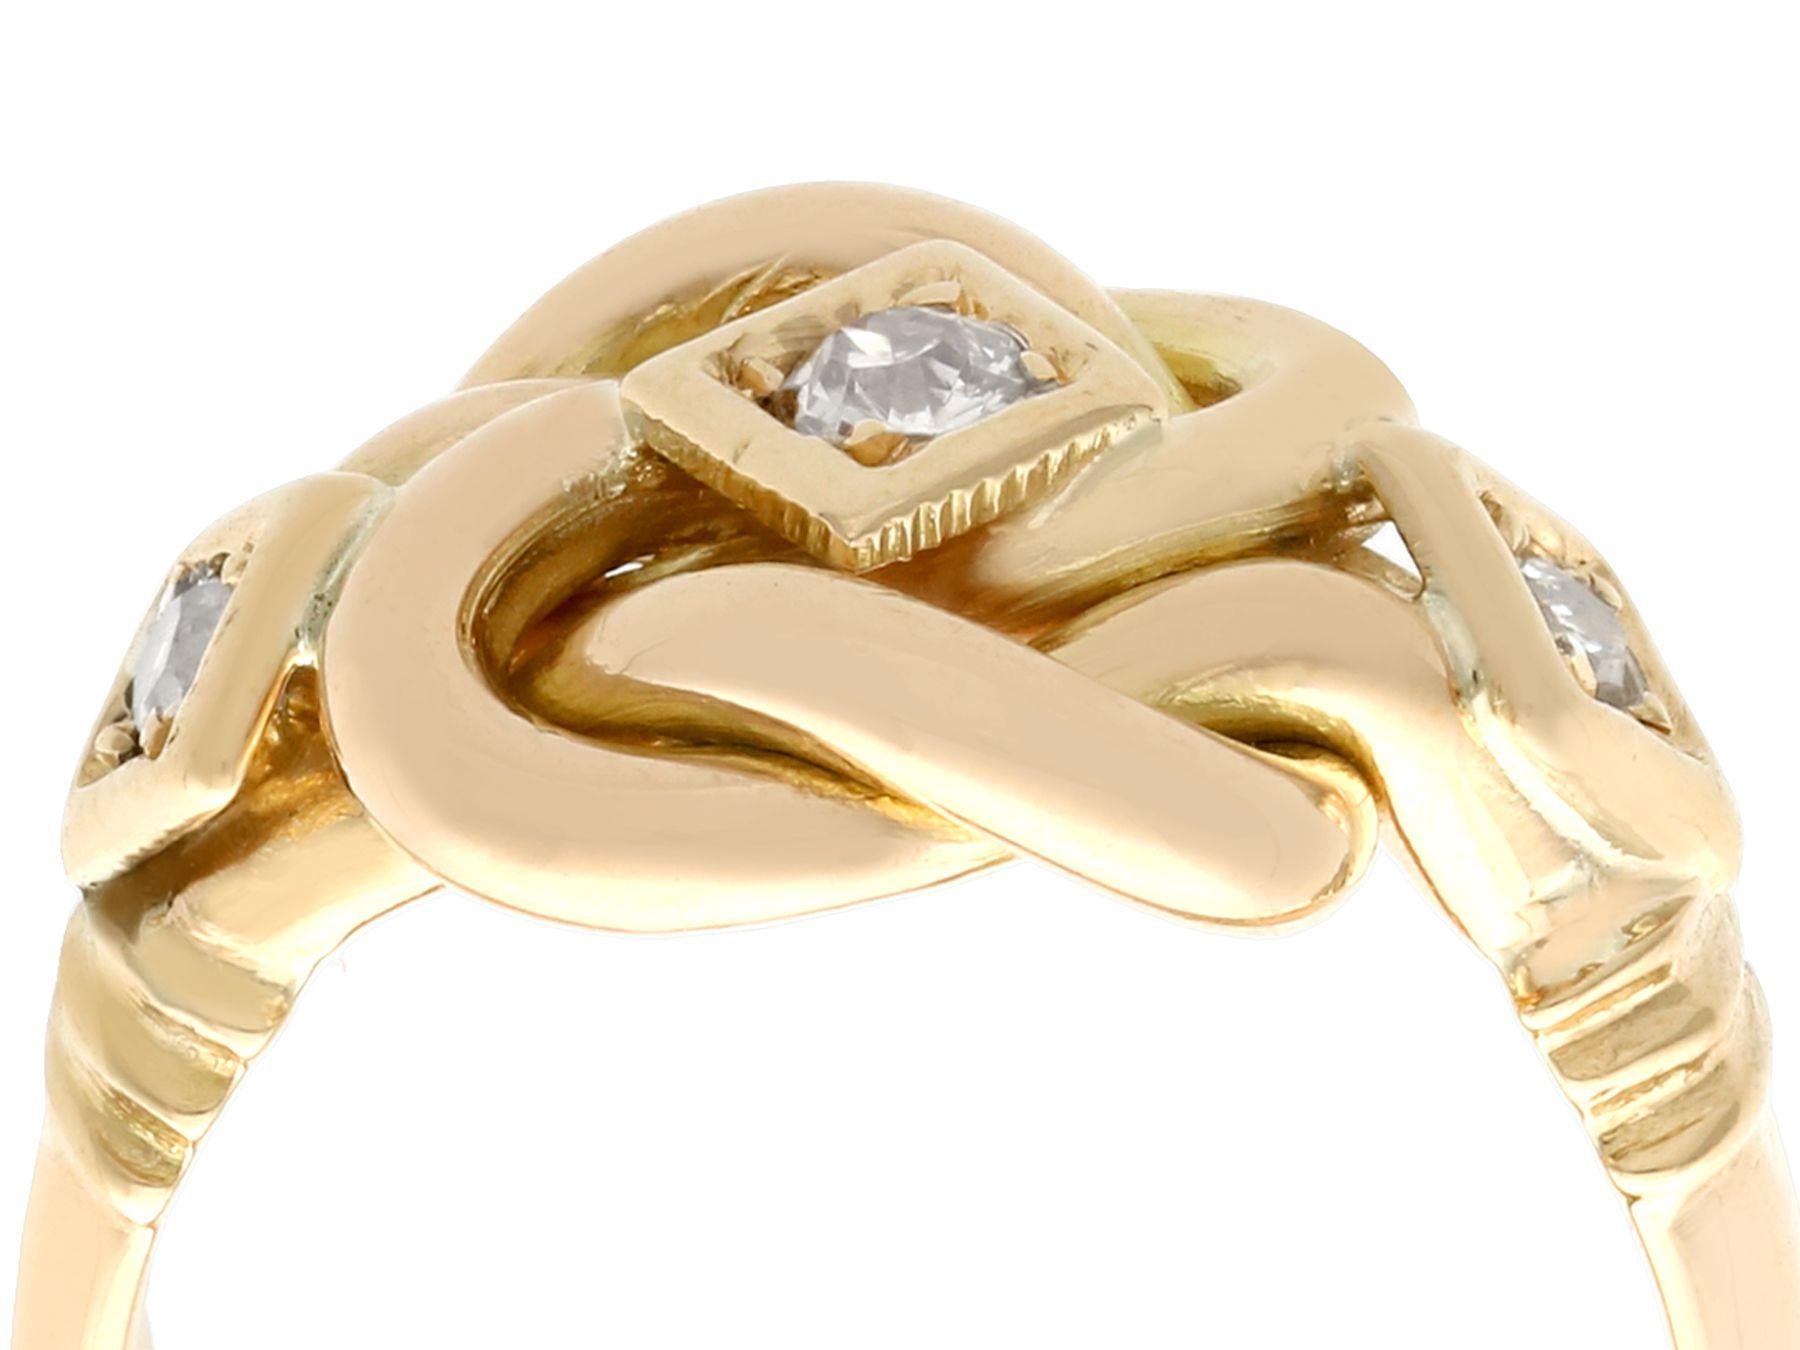 A stunning, fine and impressive antique 0.31 carat diamond and 18 carat yellow gold love knot ring; part of our diverse antique jewellery and estate jewelry collections.

This stunning gold antique ring has been crafted in 18ct yellow gold.

This